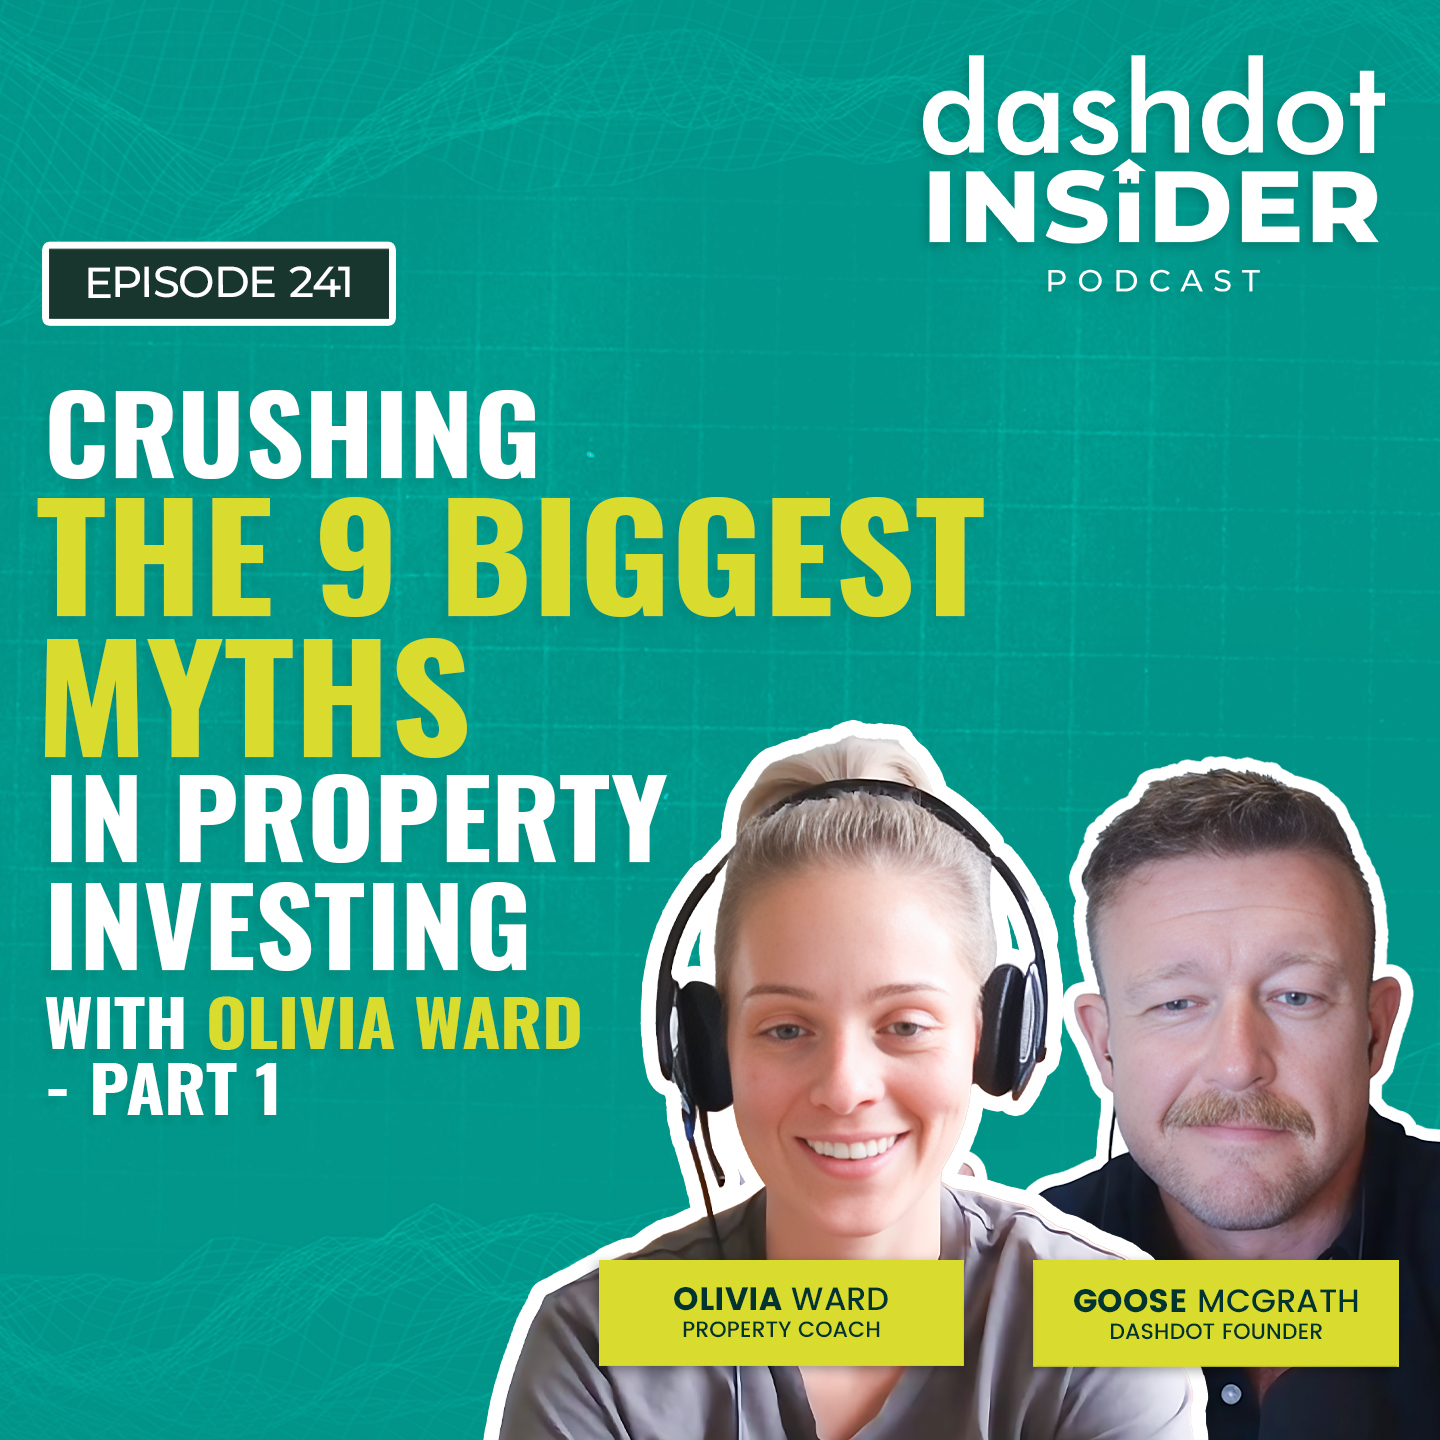 Crushing the 9 Biggest Myths in Property Investing with Olivia Ward - Part 1 | #241